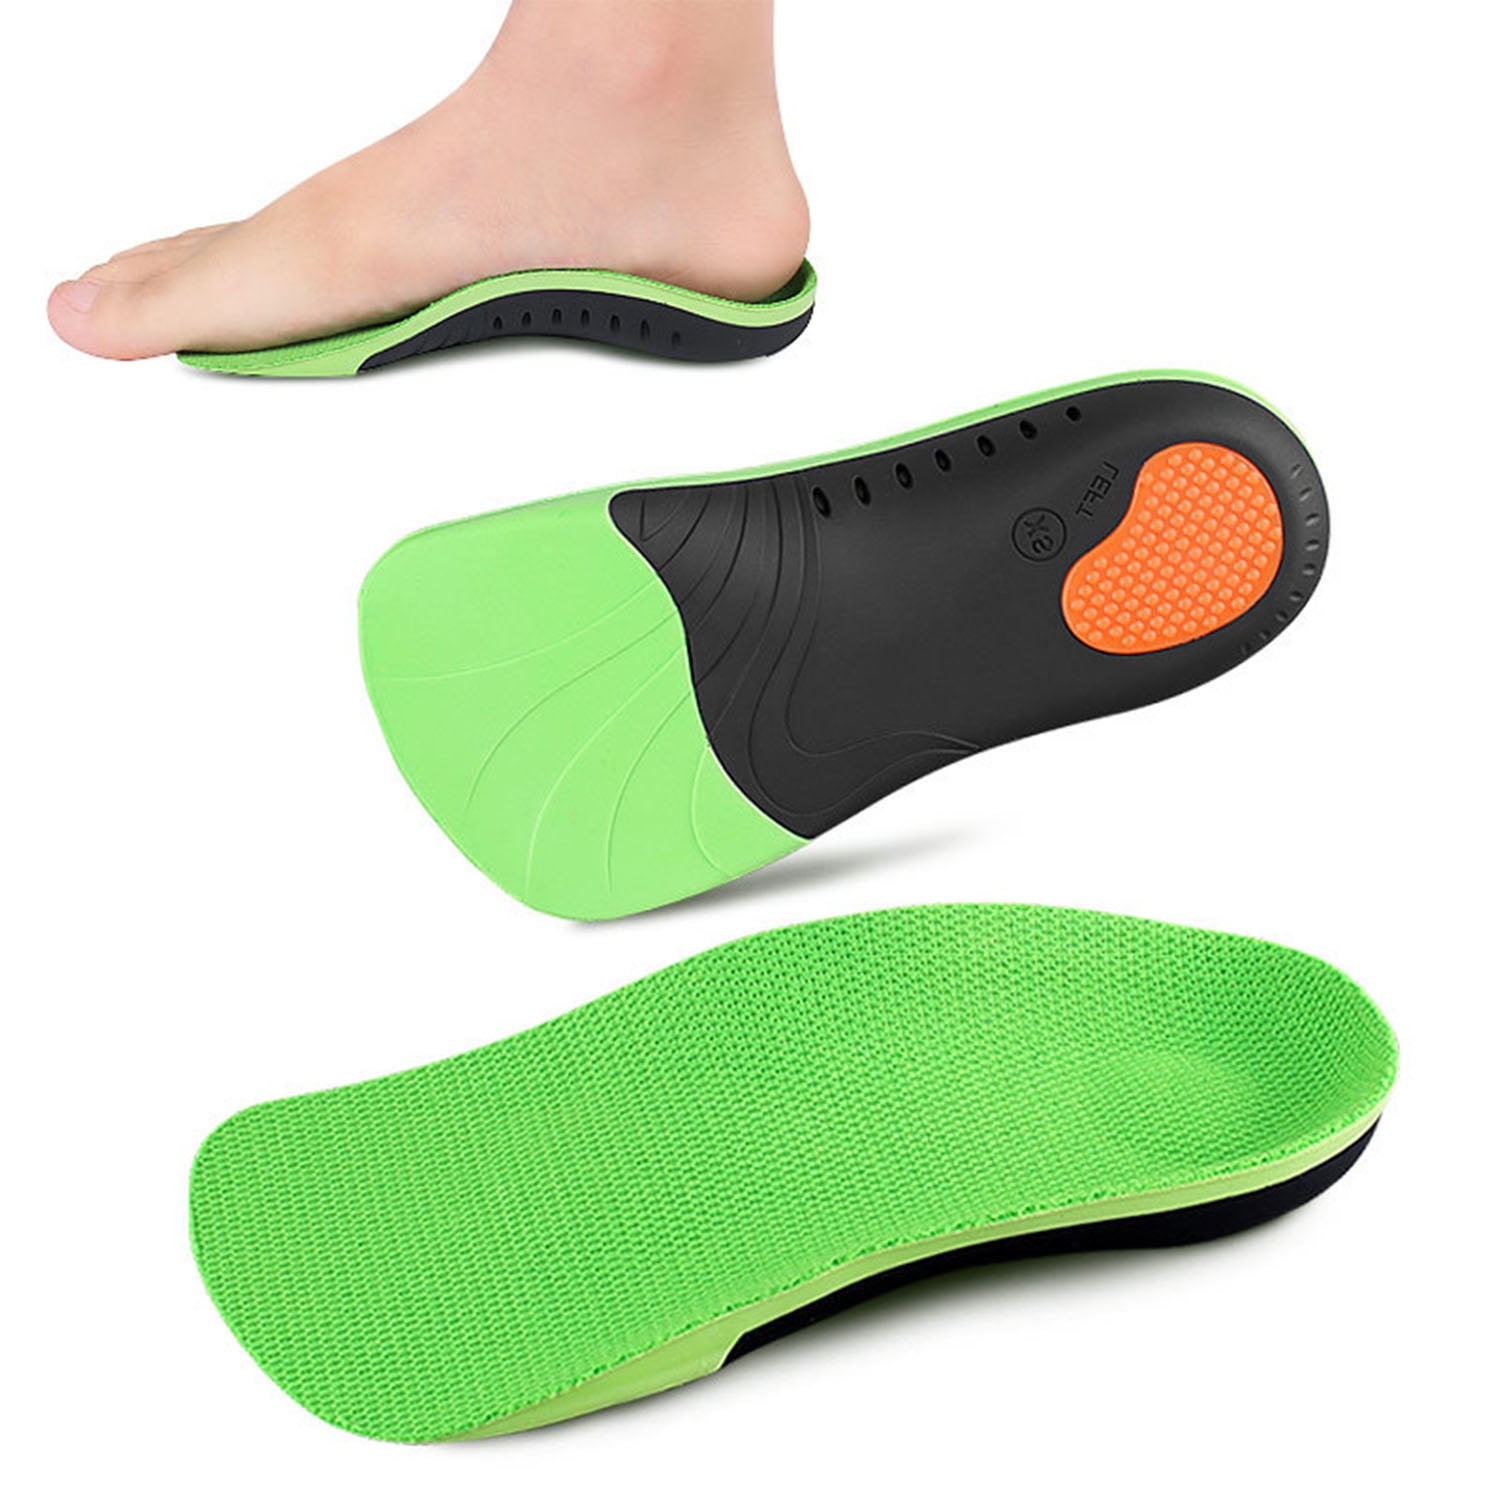 Foot Arch Men Women Shoe Insole Plantar Fasciitis Orthotic Insoles 3/4 High Arch Support Shoe Inserts for Flat Feet 